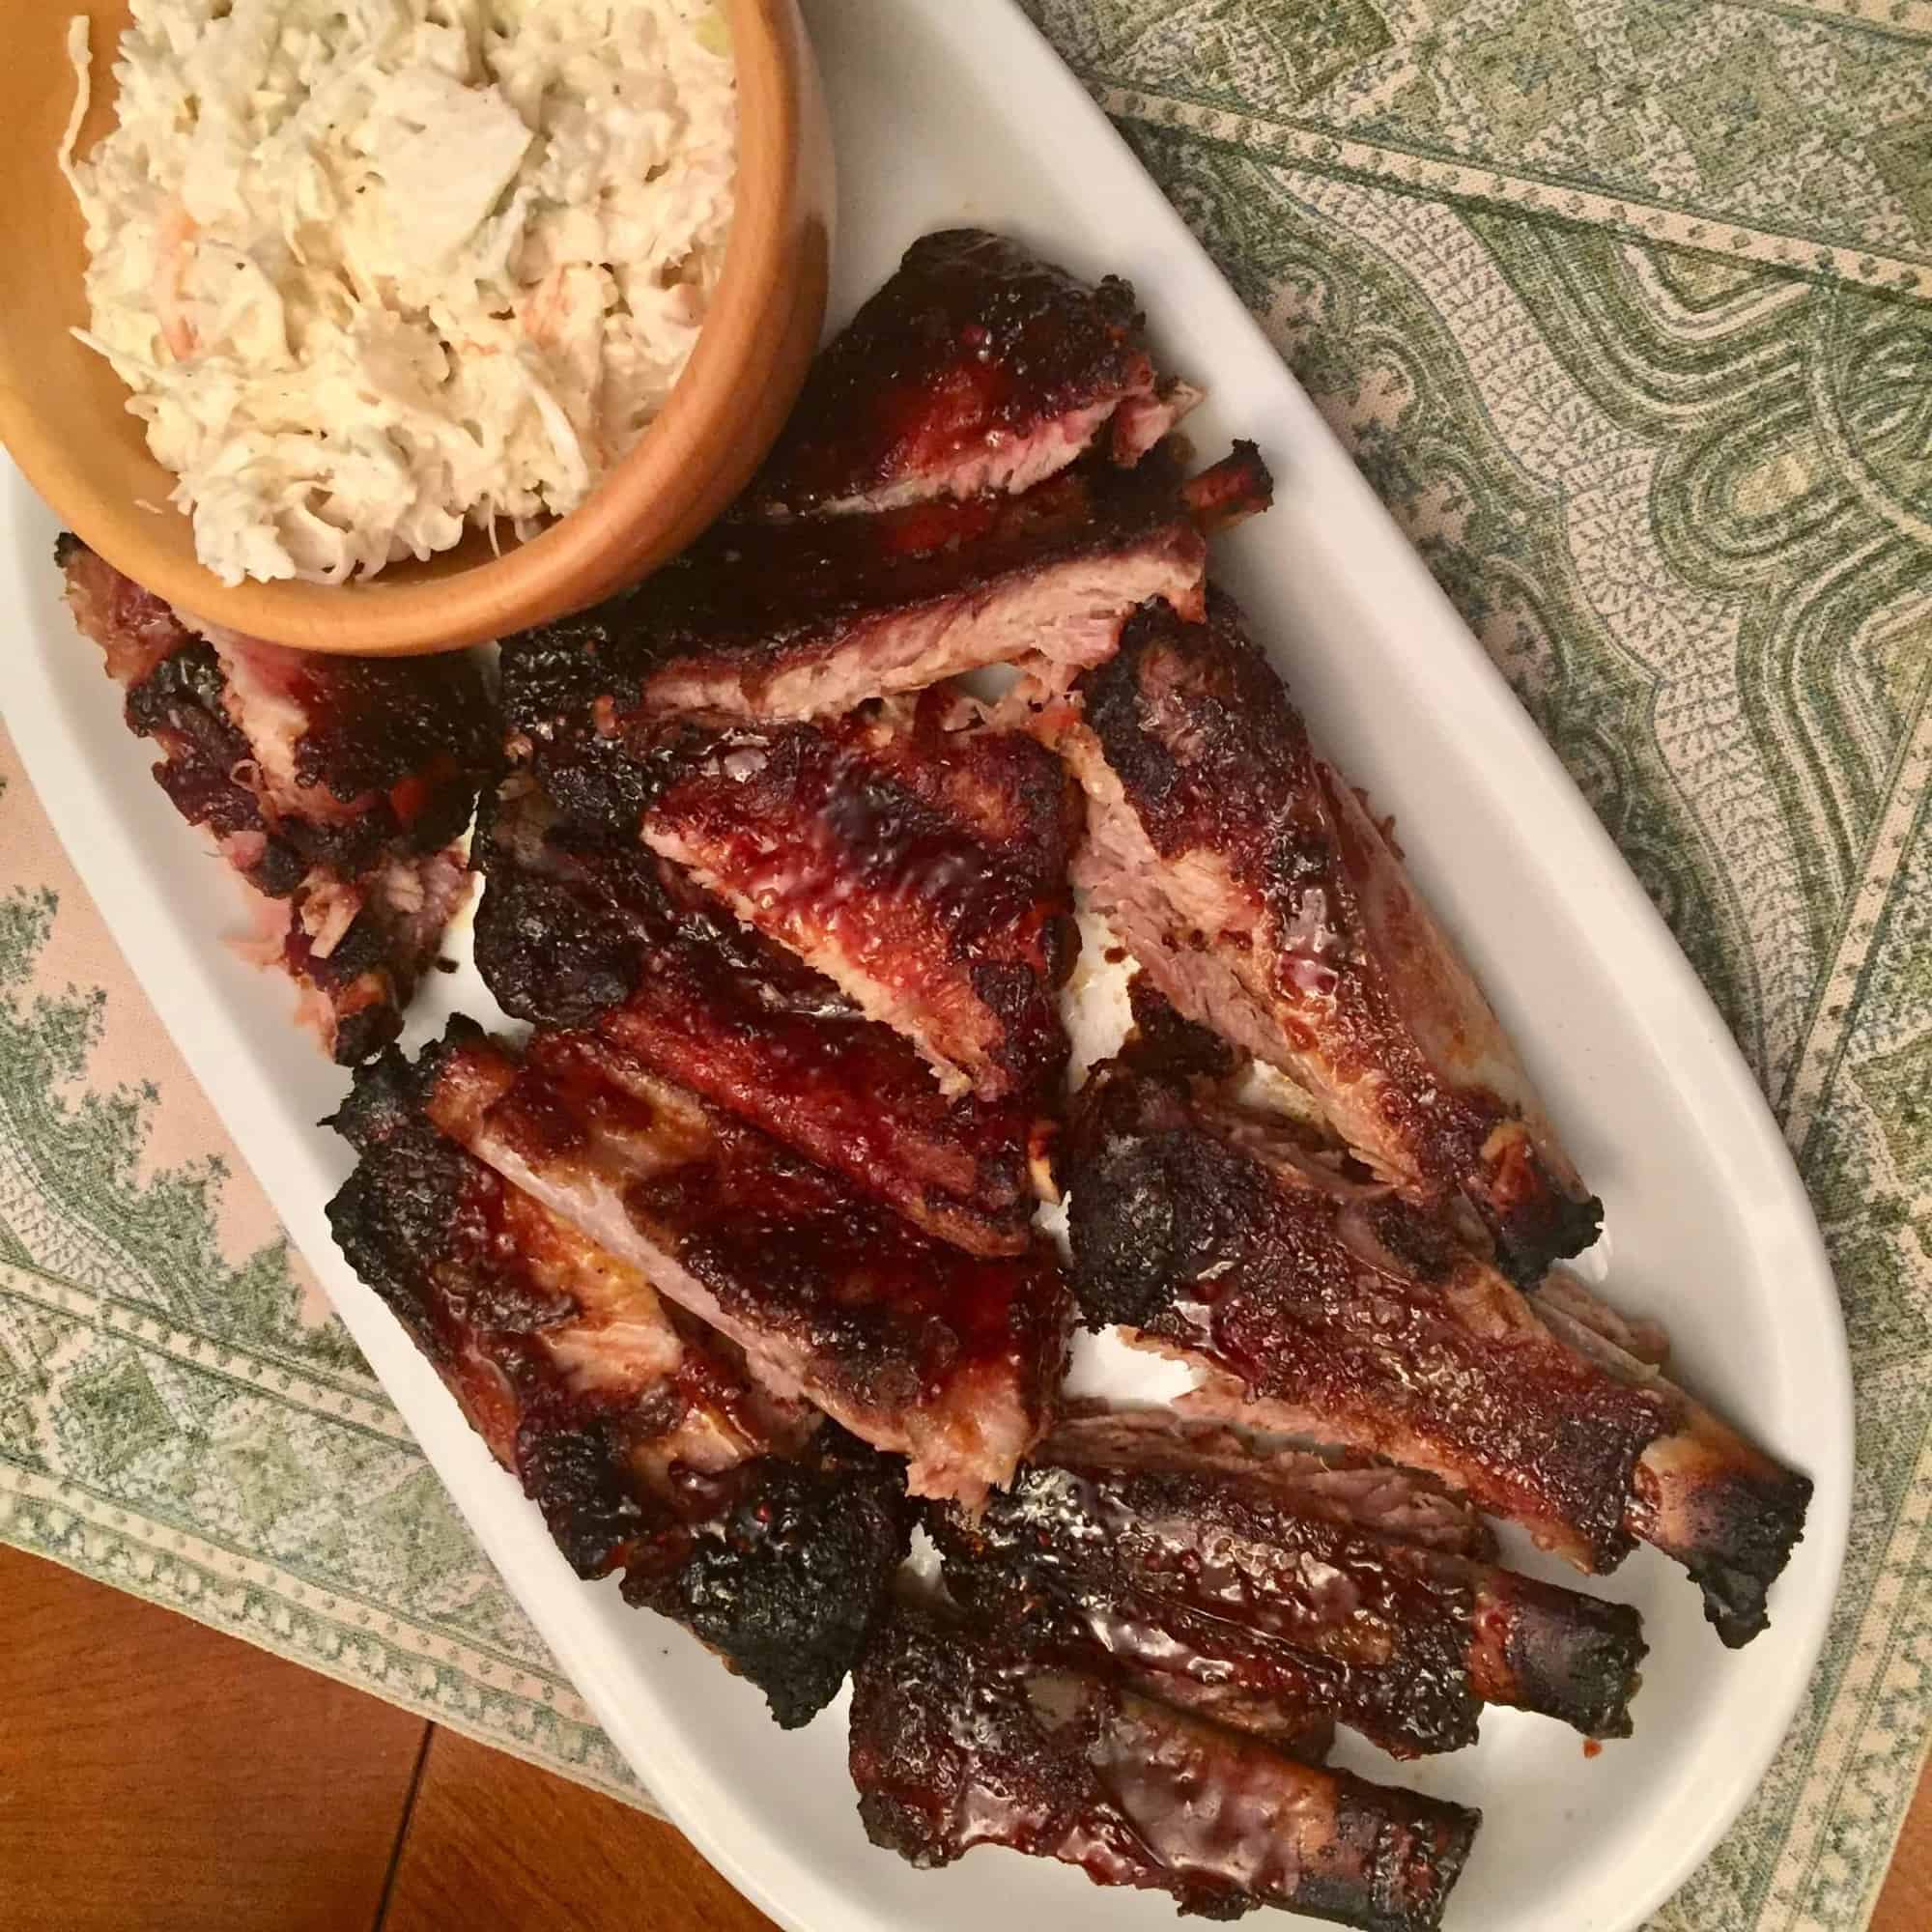 Banana Ketchup Ribs from Nicole Ponseca’s “I am a Filipino…and this is how we cook”.